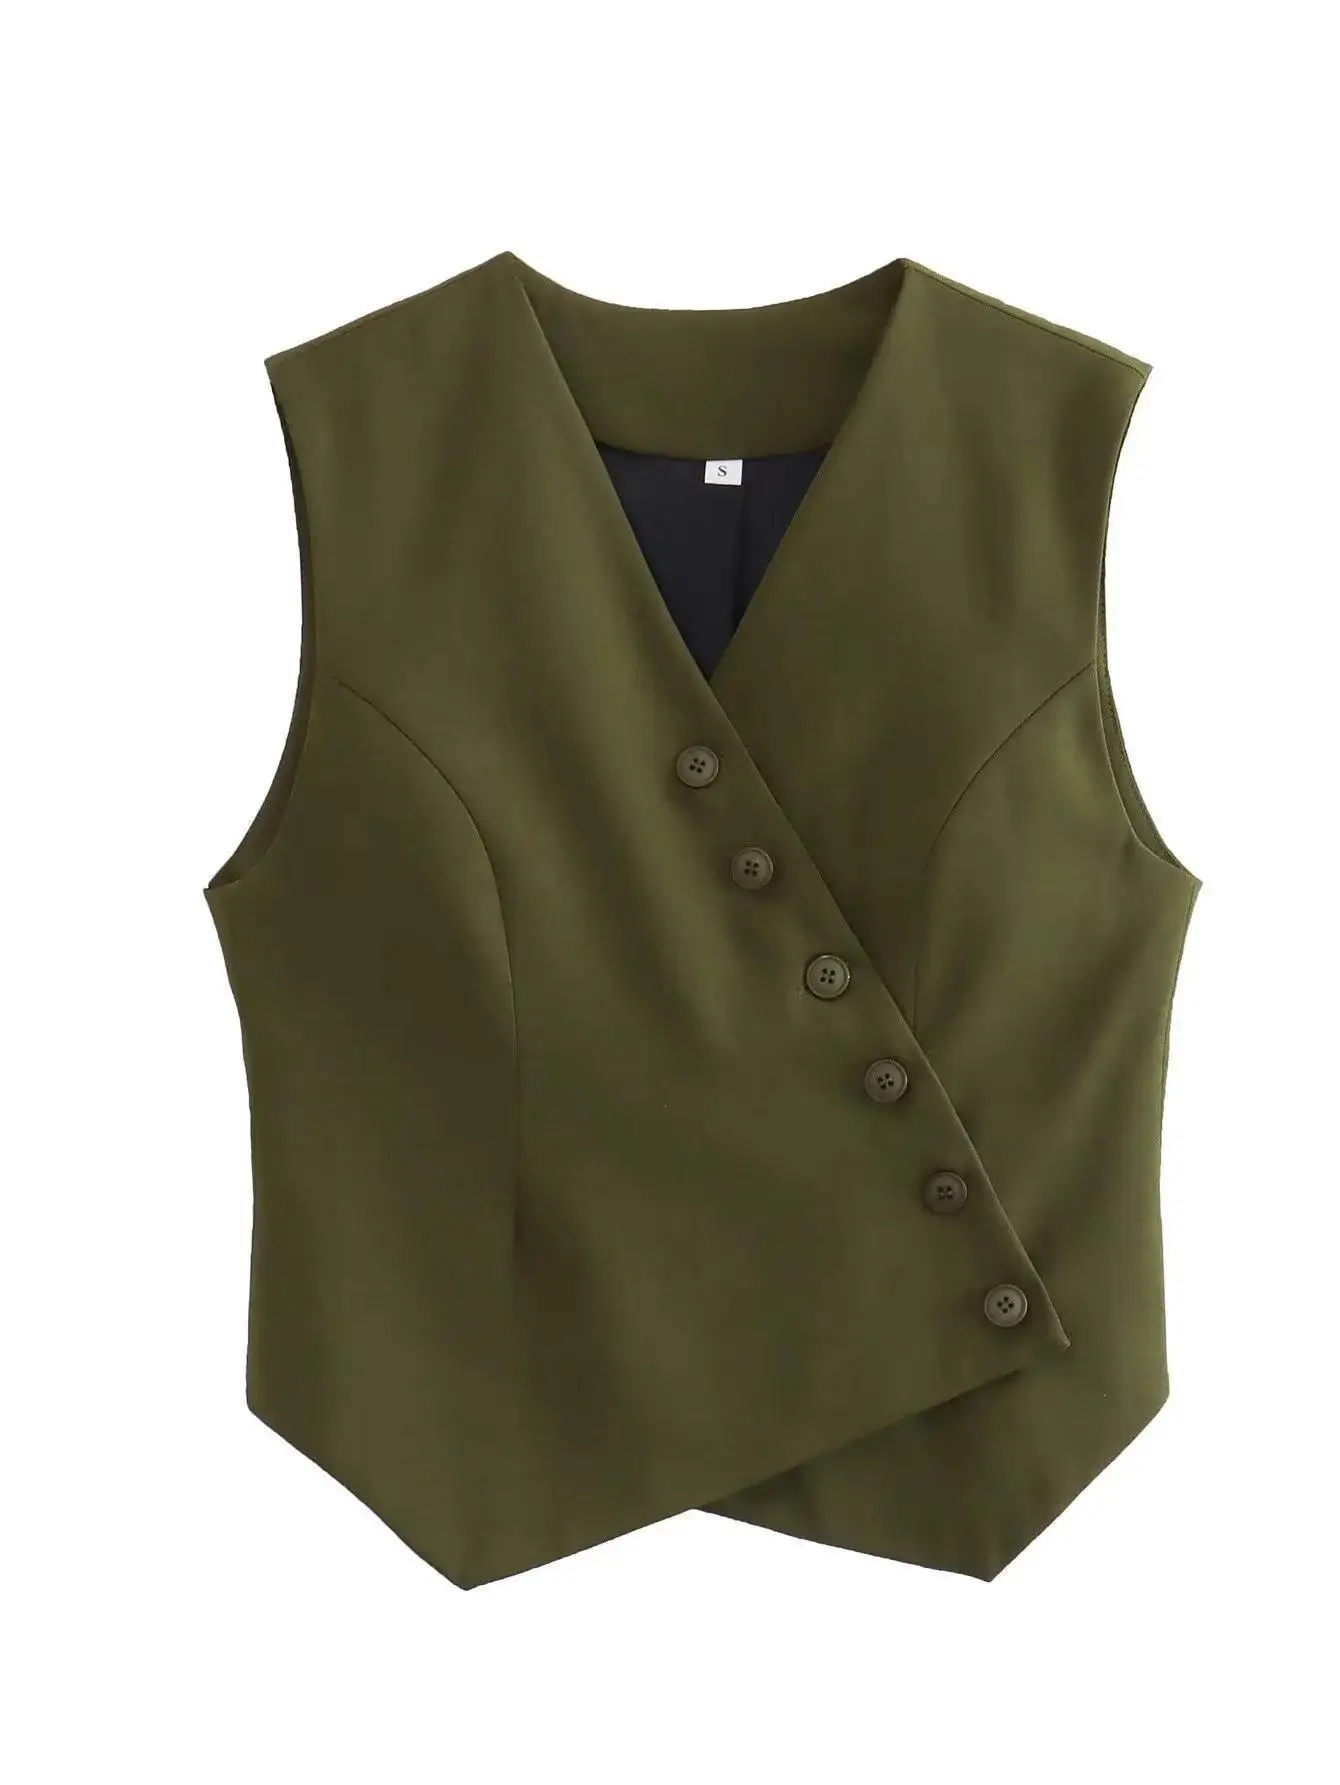 

Fashionable Women's Vest in Army Green with Asymmetric Design Tops